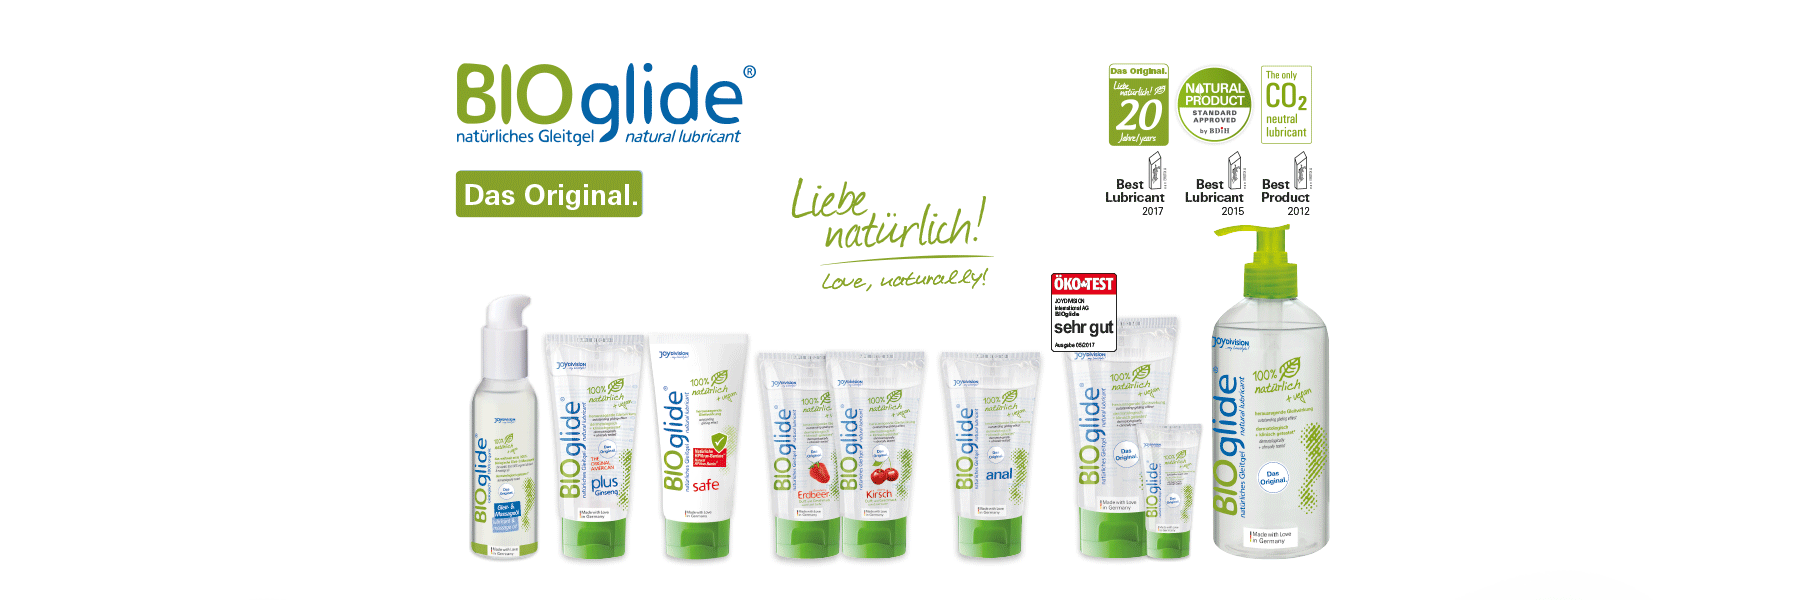 Bioglide lubricating gel removes pain and dryness of the vaginal area without causing allergies and changes the normal vaginal flora, and makes it easier and more enjoyable to have sex. Bioglide lubricating gel feature - No artificial fragrances, dyes and preservatives Optimized pH without altering vaginal acidity - No infection and normal vaginal flora - With water base, without lubricating properties _ Tested in terms of skin and clinical _ Anti-allergy Bioglide lubricating gel for women Research shows that one in three women suffers from vaginal dryness in life. Vaginal dryness often causes pain during sex, and unfortunately many women are embarrassed to talk about it and suffer in silence. Naturally, after sexual intercourse, a woman's vagina releases natural secretions, which moisturize the area and make it easier to enter. But there are several possible causes for this disorder. Lack of moisture can simply be treated with a lubricant such as bioglide lubricating gel. Lubricants return delicate mucous membranes (mucous membranes, cell layers that protect parts of the body that do not need to be dried) to moist and elastic conditions and allow women with vaginal dryness to enjoy painless sex. consumption instruction Dip one foot into warm paraffin 30 minutes, pausing between layers to allow them to dry.